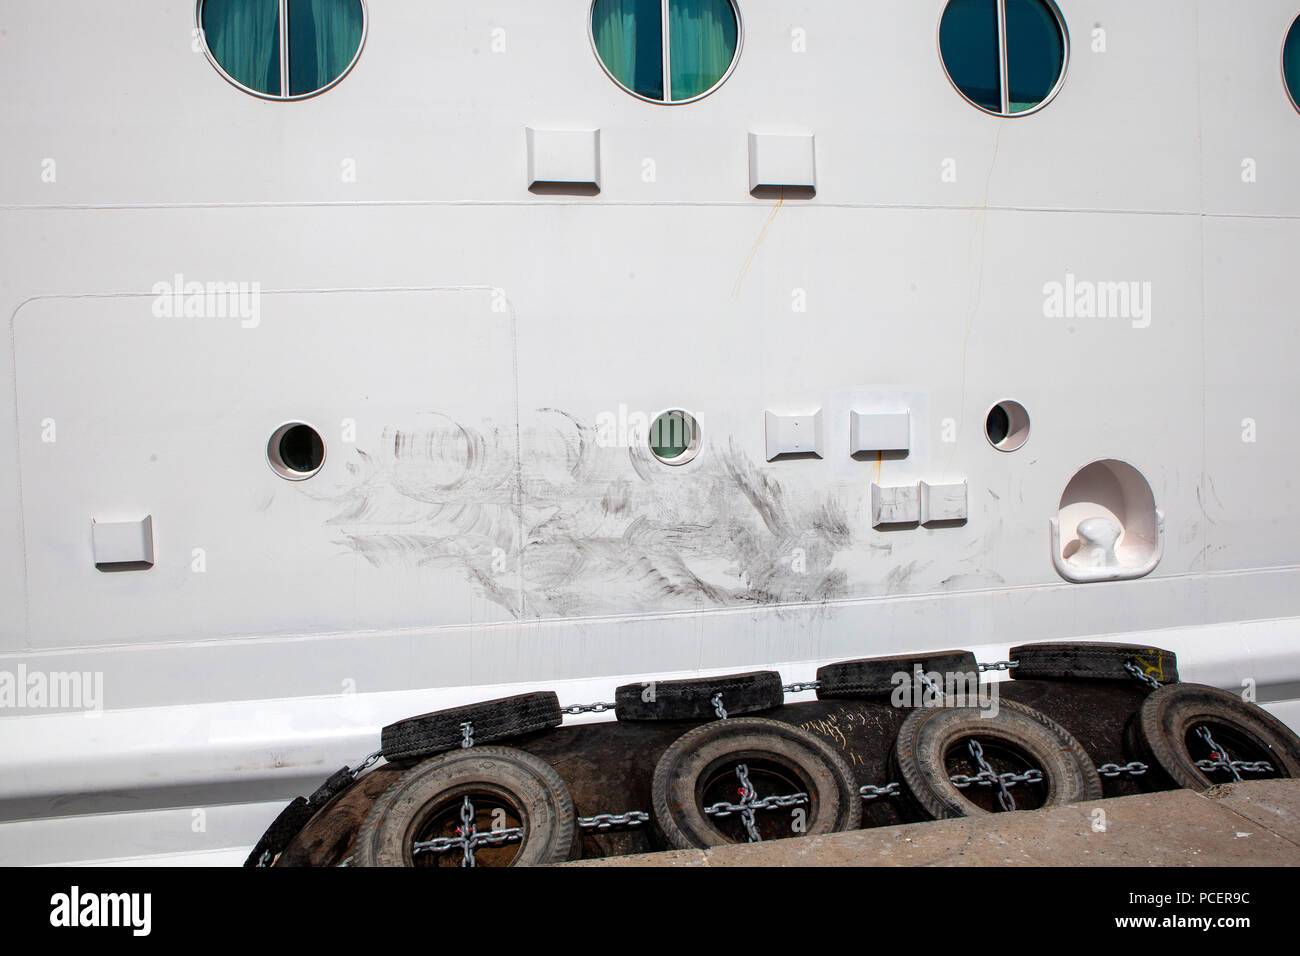 Floating Jetty Rubber Fender bumpers making black tyre marks on Independence of the Seas cruise ship while docked Stock Photo